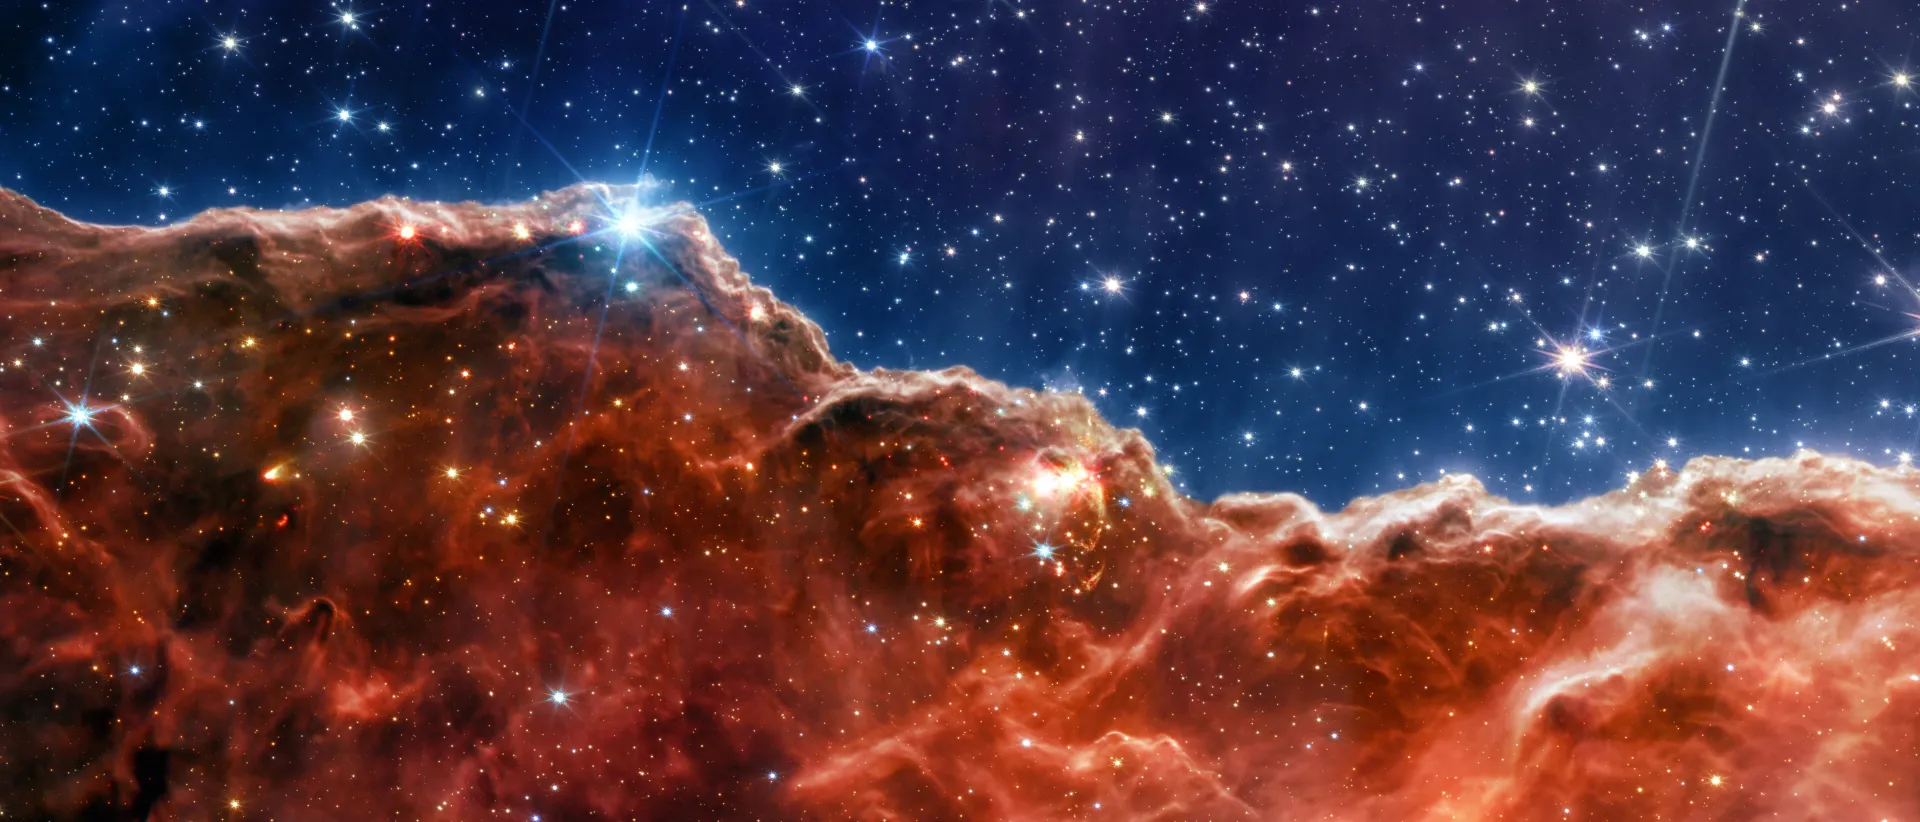 Carina Nebula. Star-forming region in the deep space. Gas accumulations in outer space. James webb telescope research of galaxies. Space landscape. JWST. Elements of this image furnished by NASA